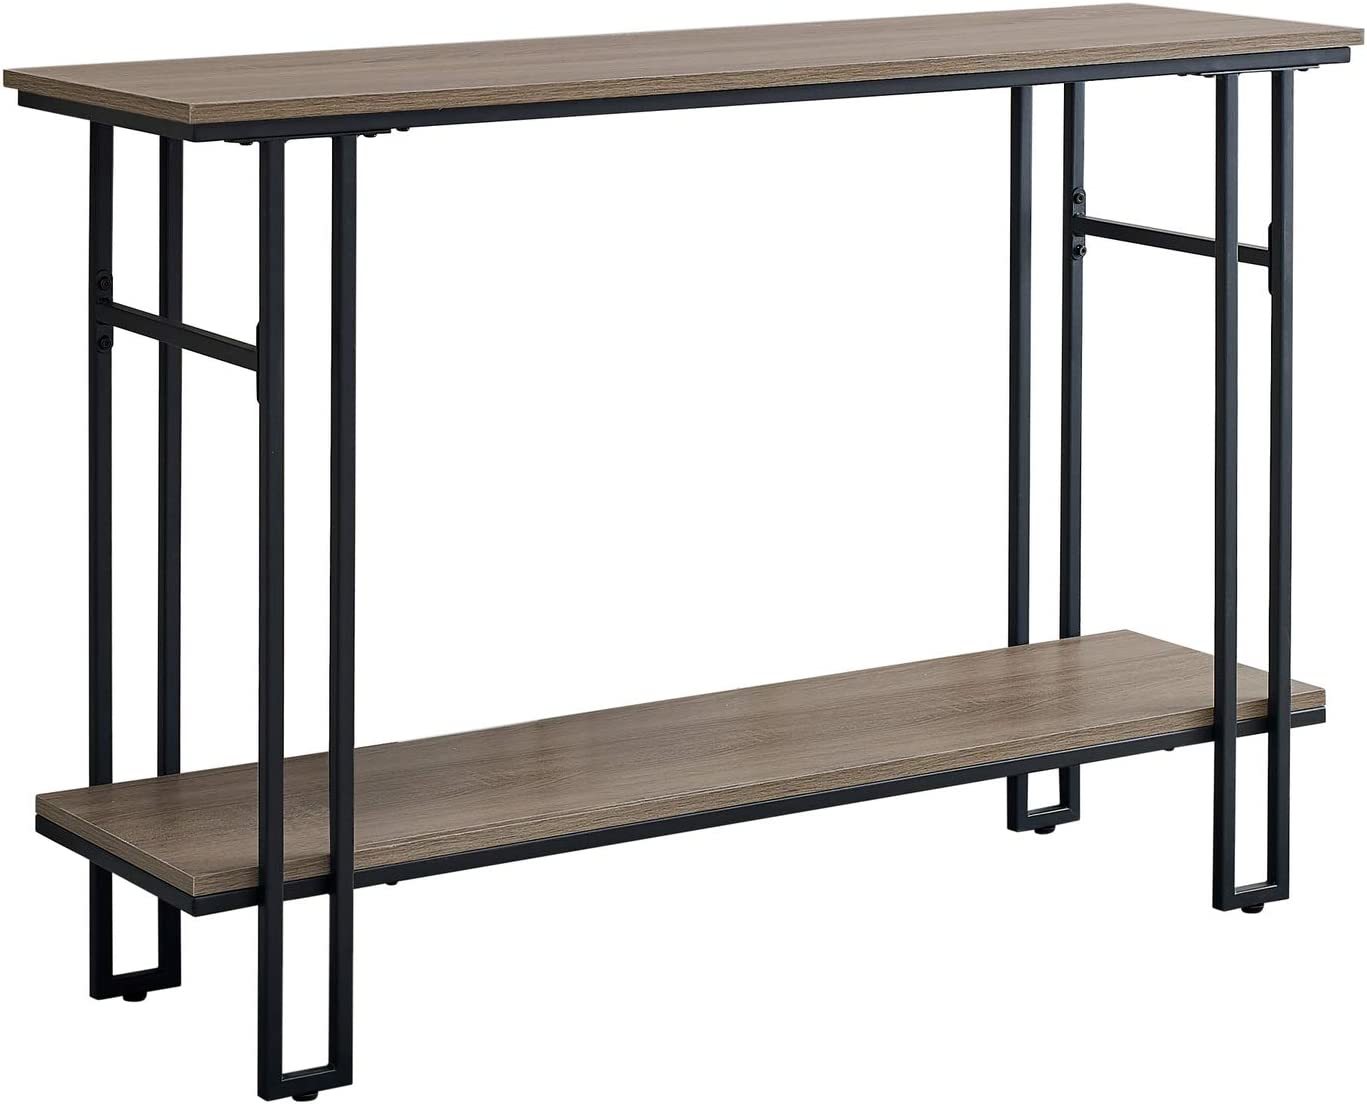 Primary image for Long Narrow Metal Frame Console Table, 48" Long, Dark Taupe, From, And Sofa.